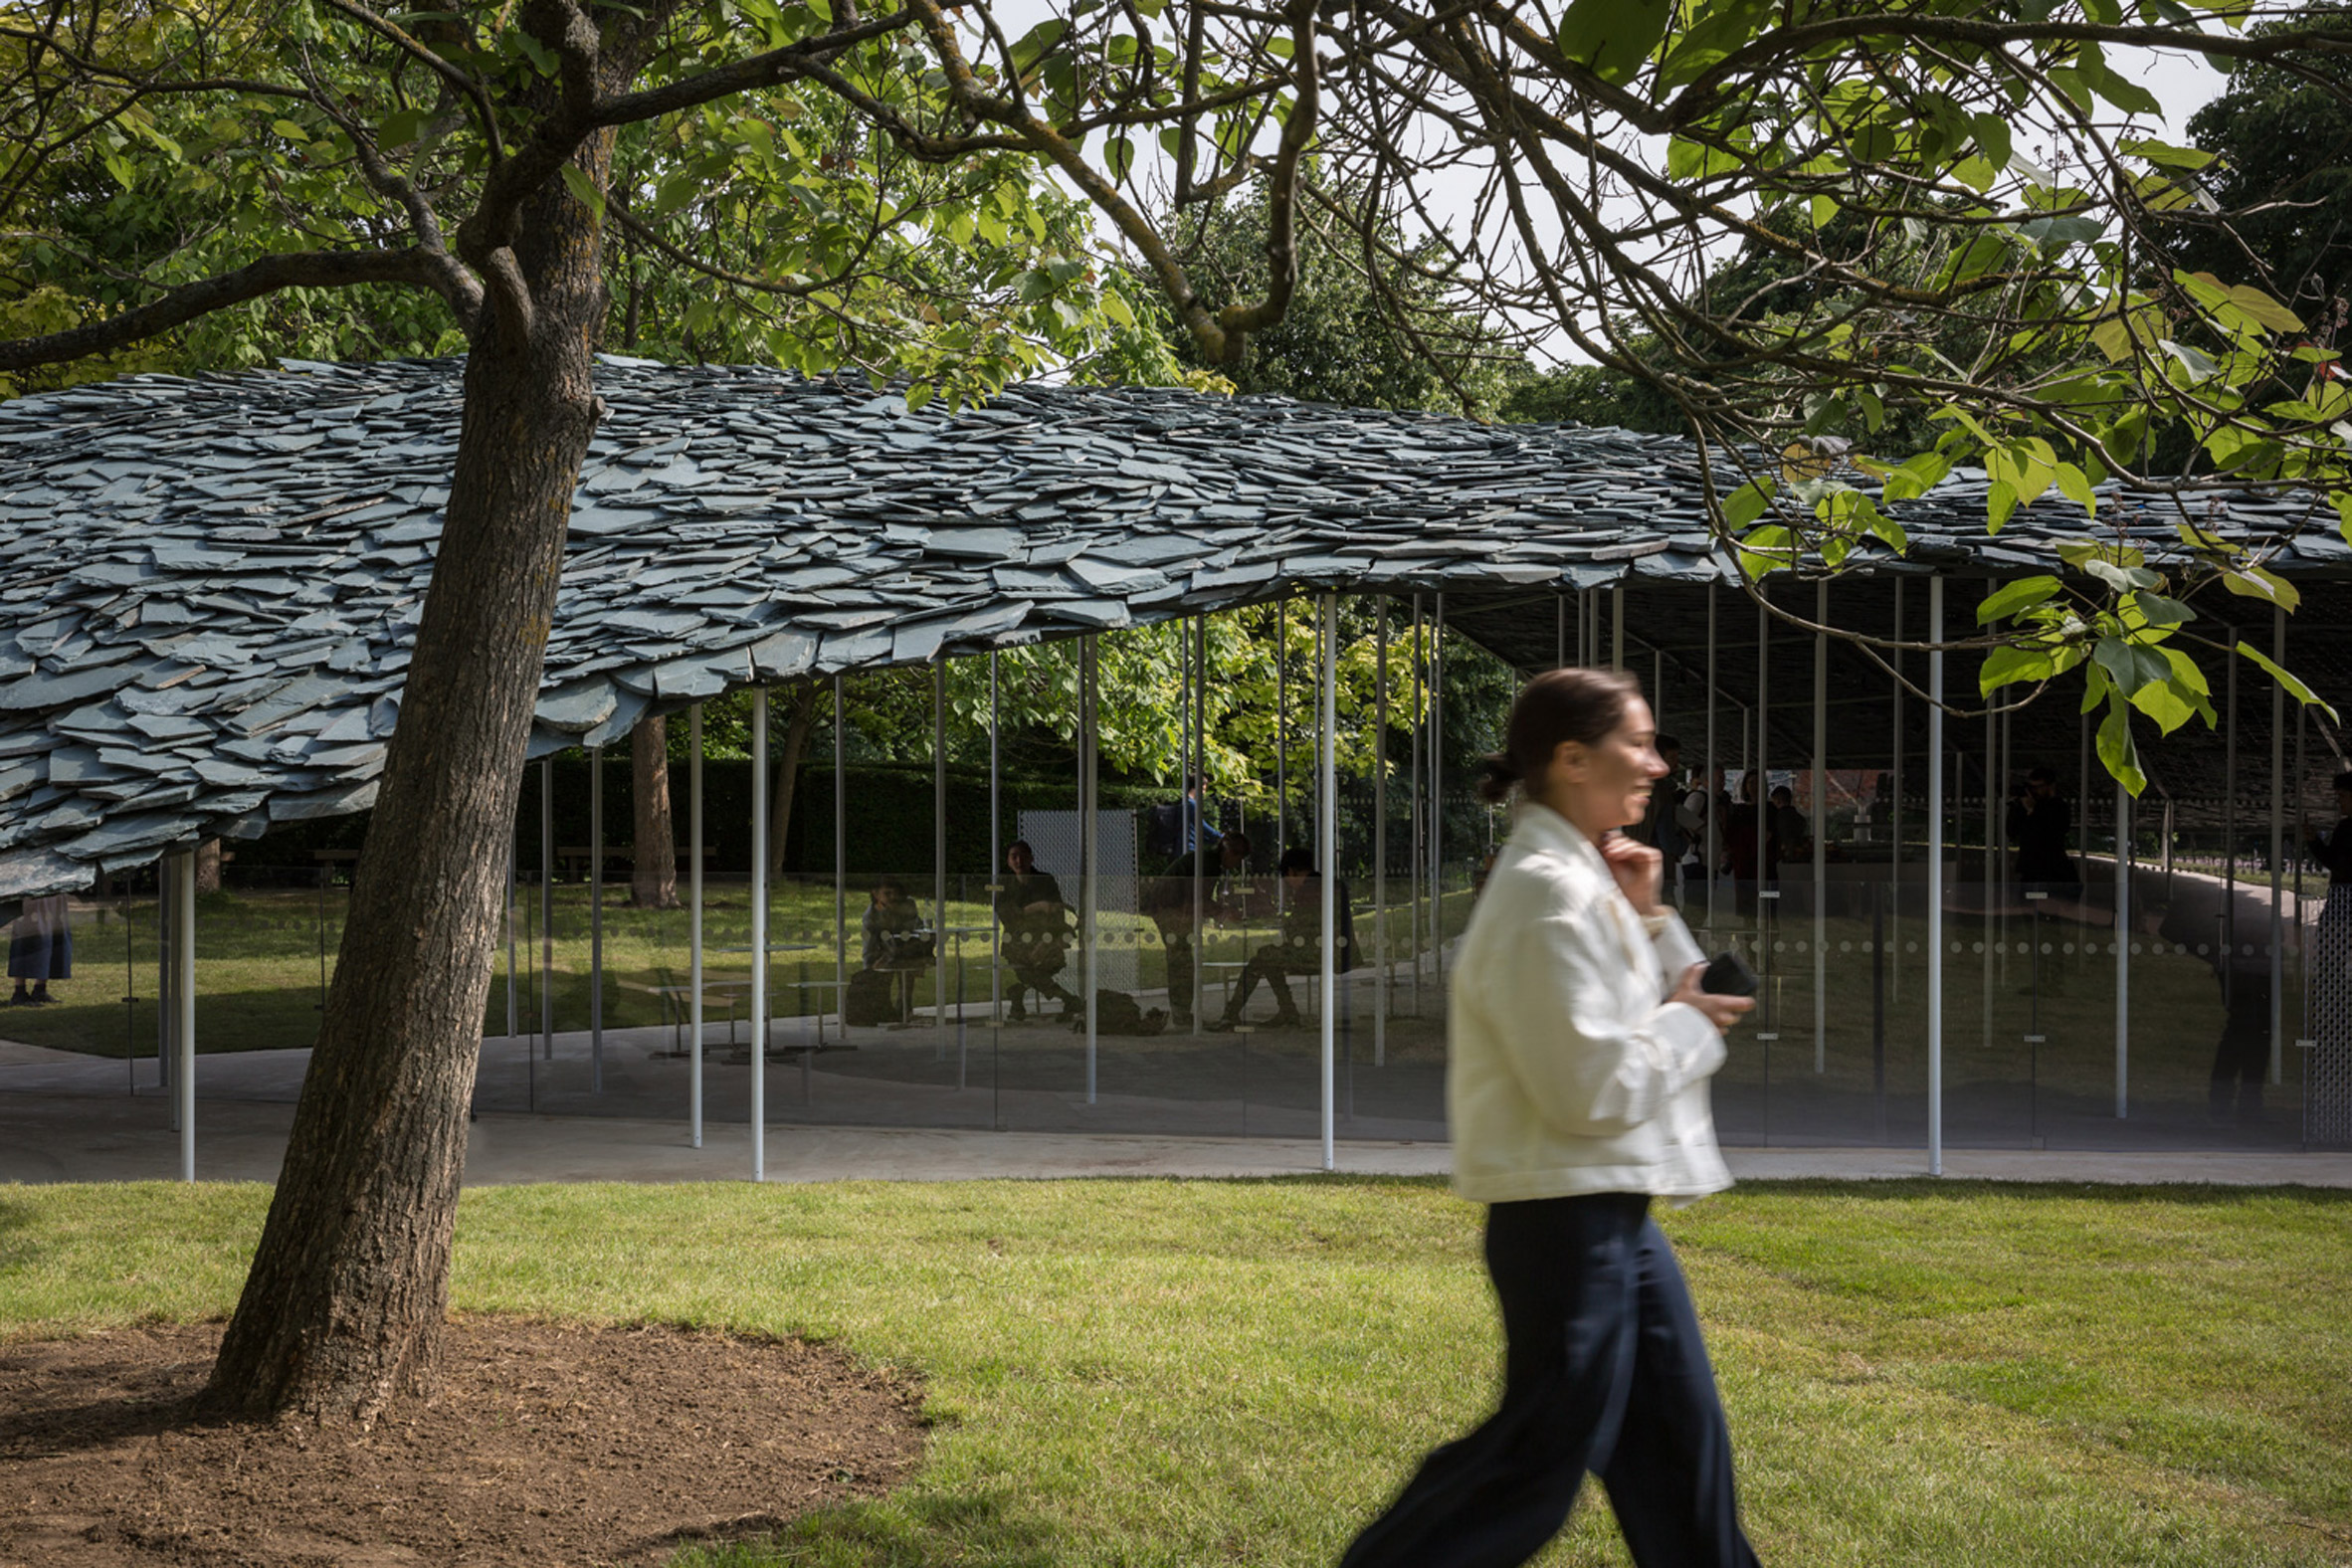 The 19th Serpentine Pavilion by Junya Ishigami with the Concept of âFree Spaceâ